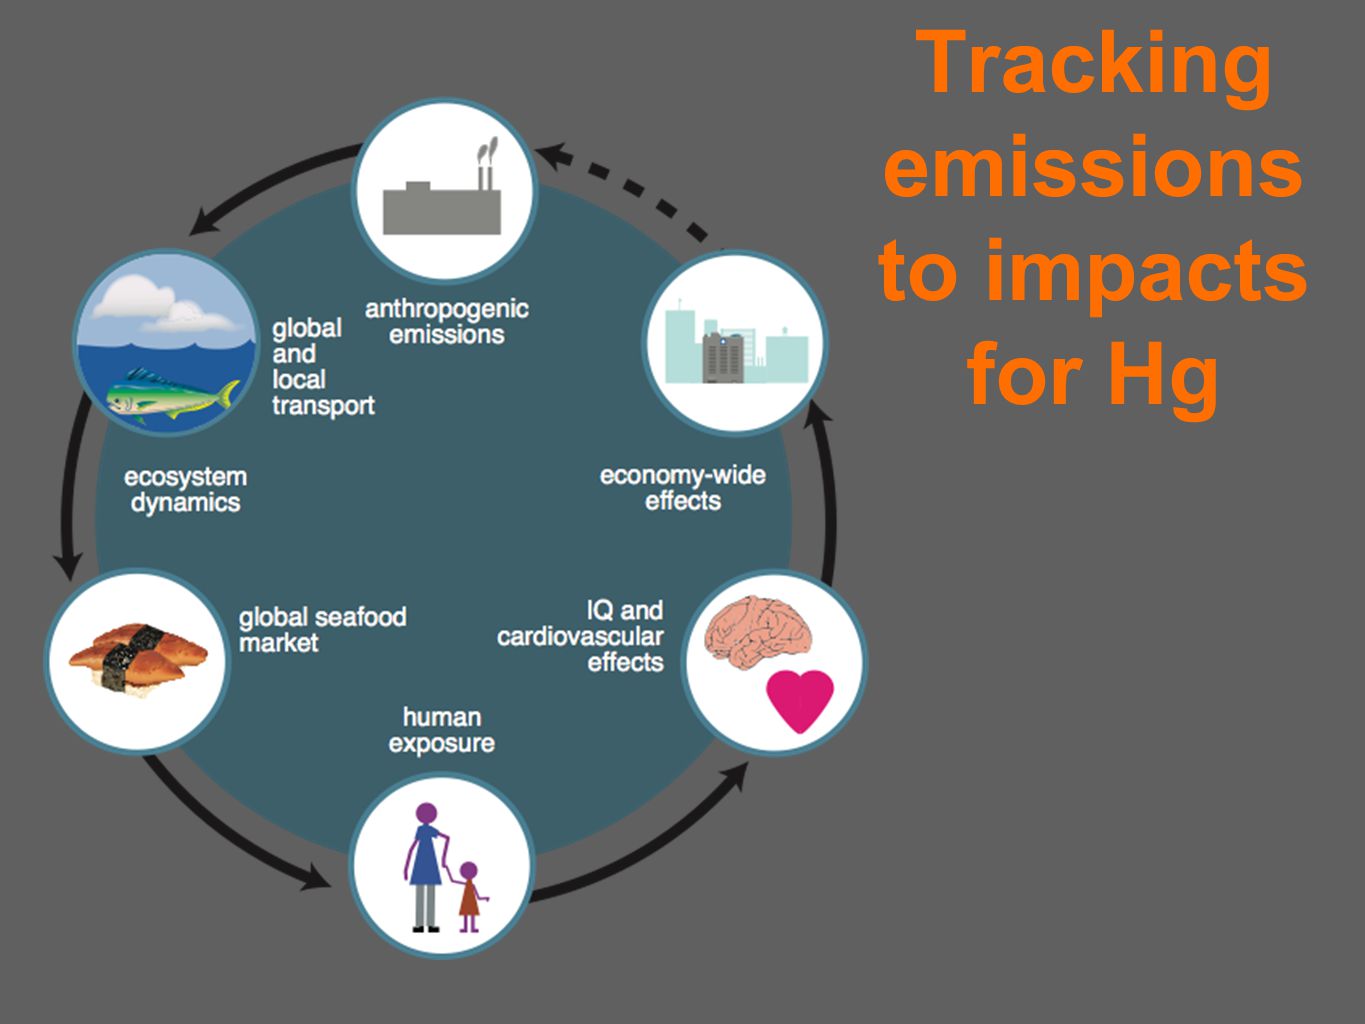 Tracking emissions to impacts for Hg